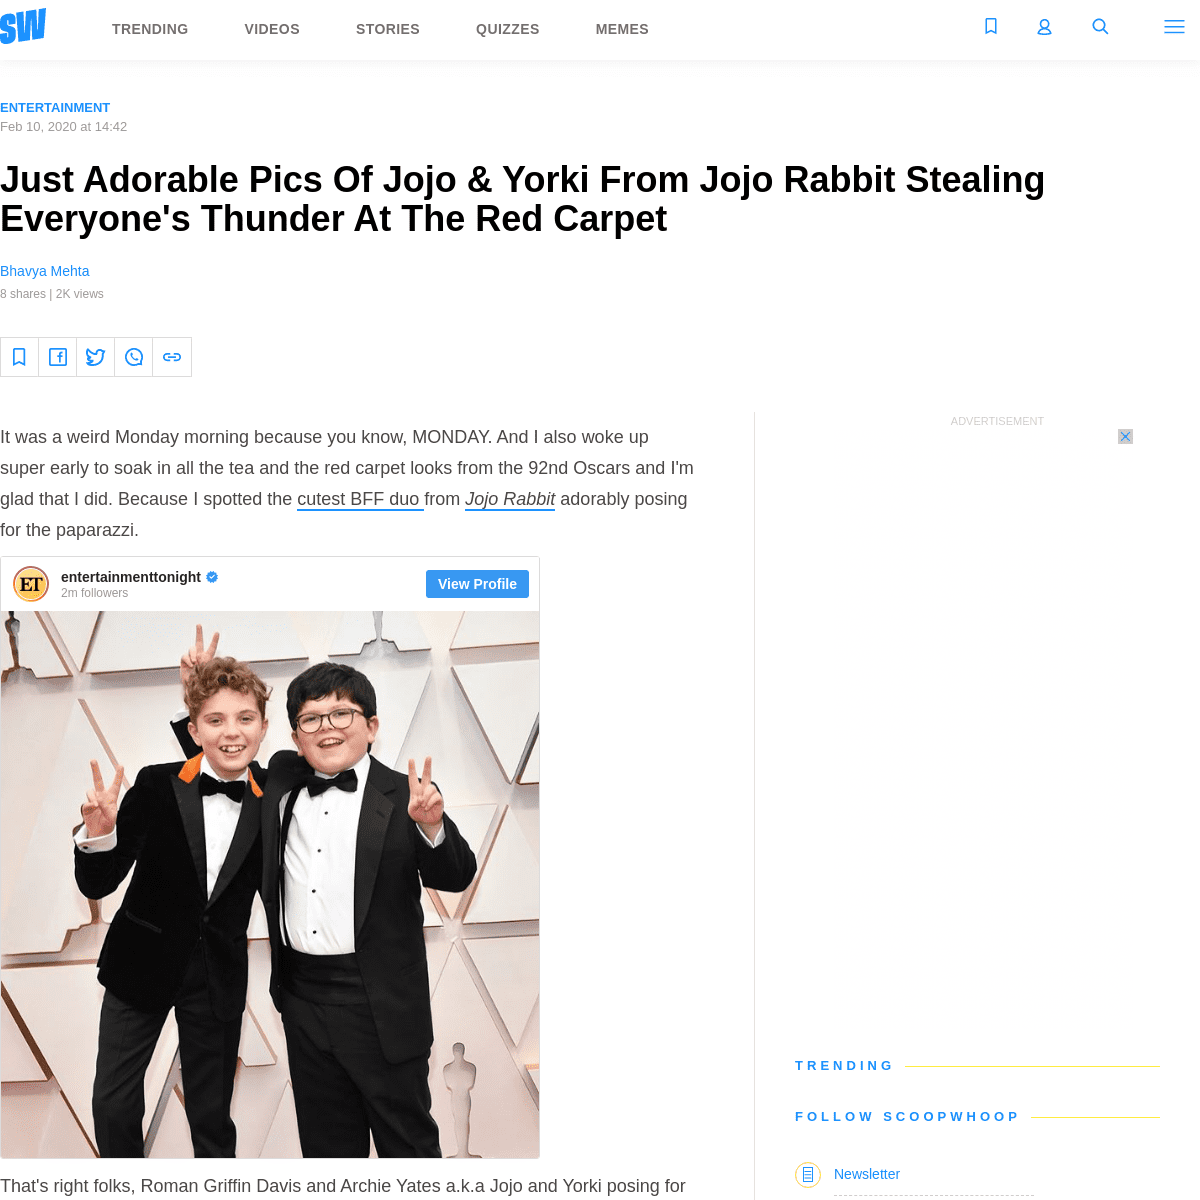 A complete backup of www.scoopwhoop.com/entertainment/jojo-and-yorki-from-jojo-rabbit-stealing-thunder-at-oscars-red-carpet/